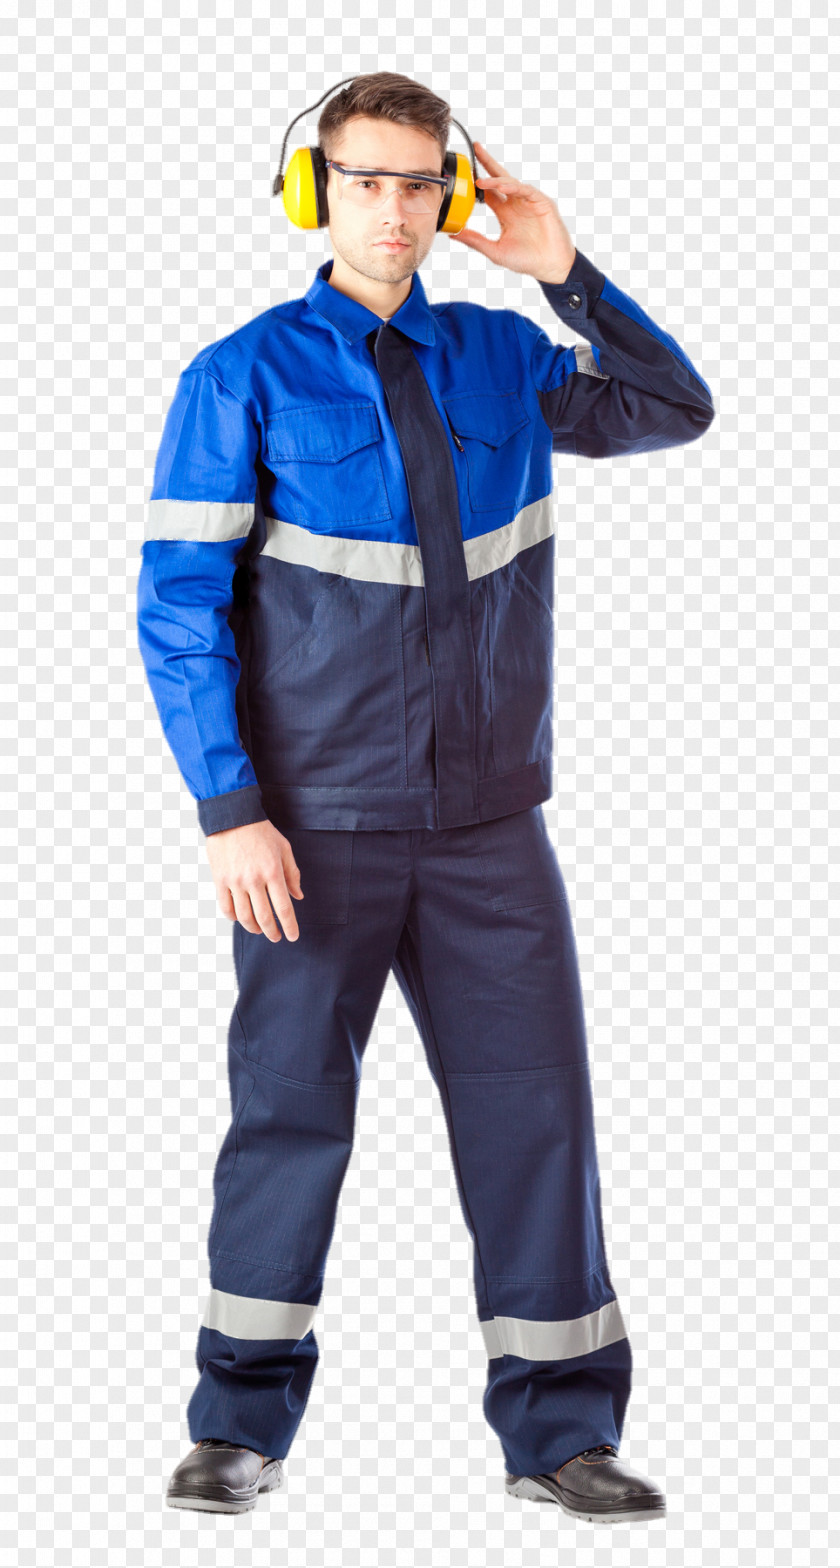 Jacket Outerwear Costume Workwear Pants PNG